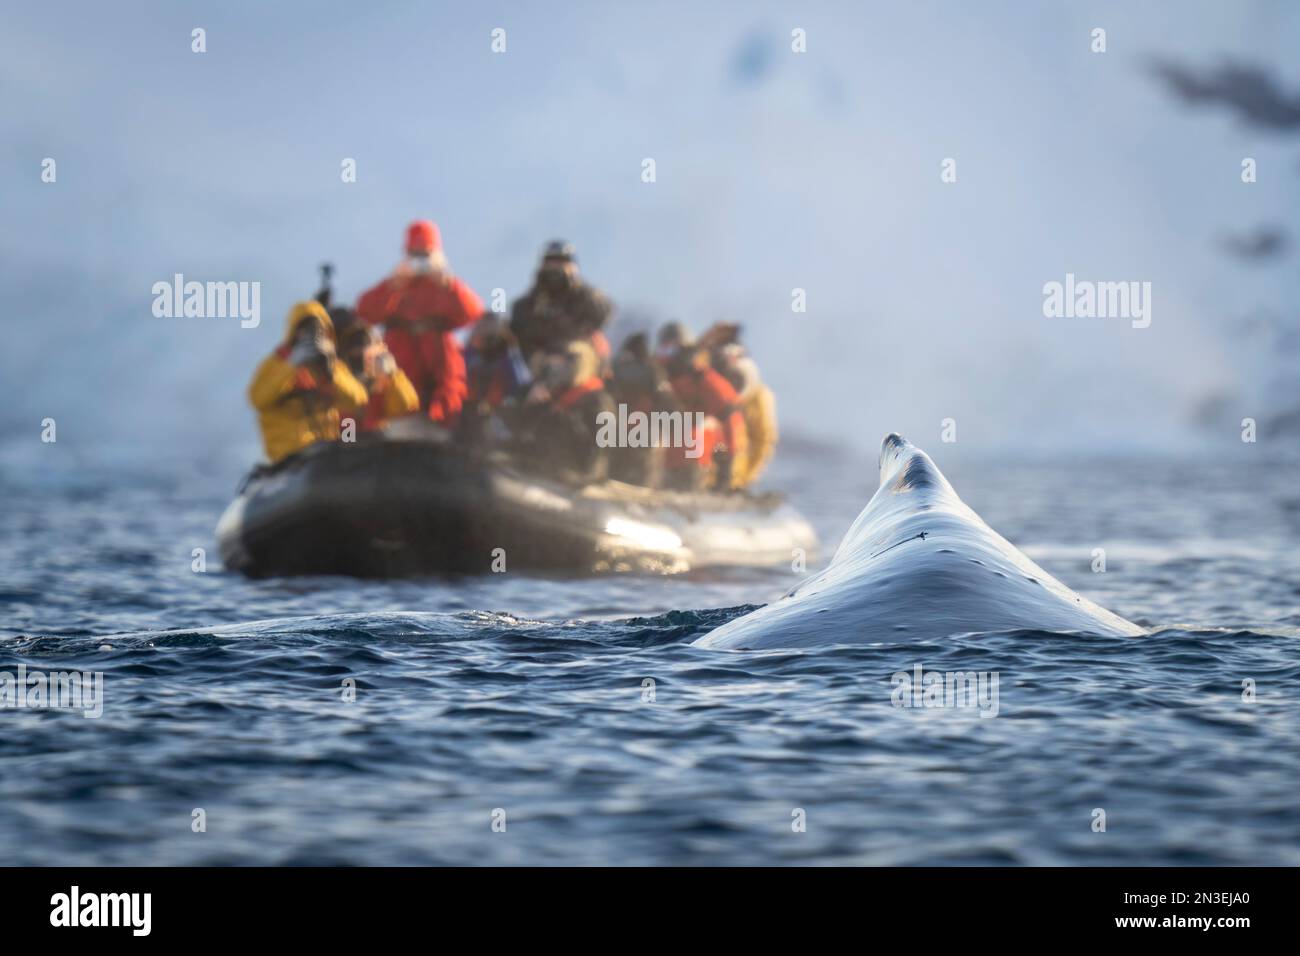 A humpback whale (Megaptera novaeangliae) surfaces just in front of an inflatable boat packed with photographers wearing multi-colored jackets and ... Stock Photo